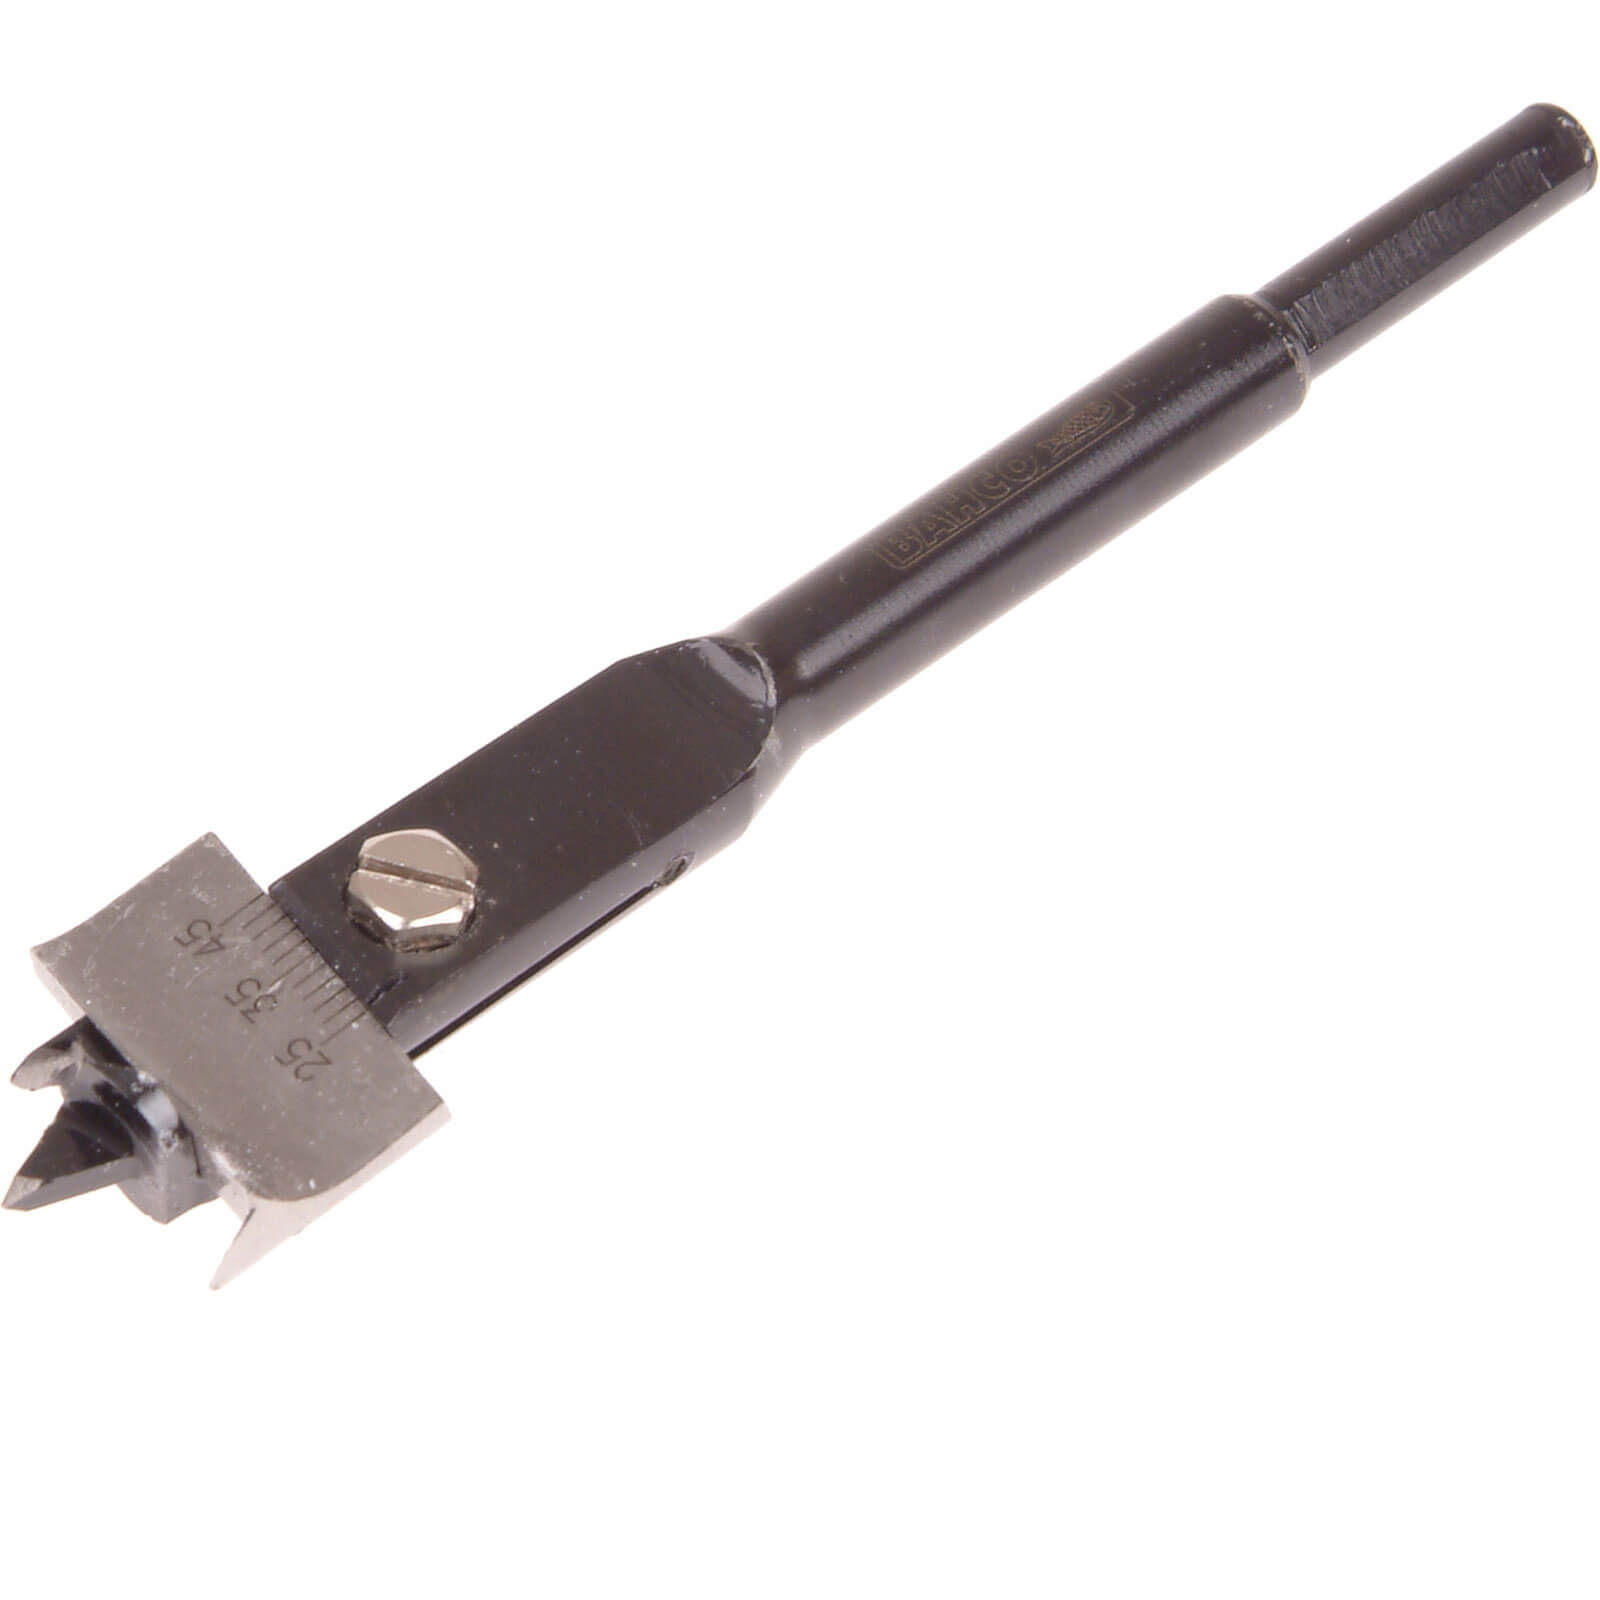 Photo of Bahco Adjustable Expanding Flat Drill Bit 15mm - 45mm